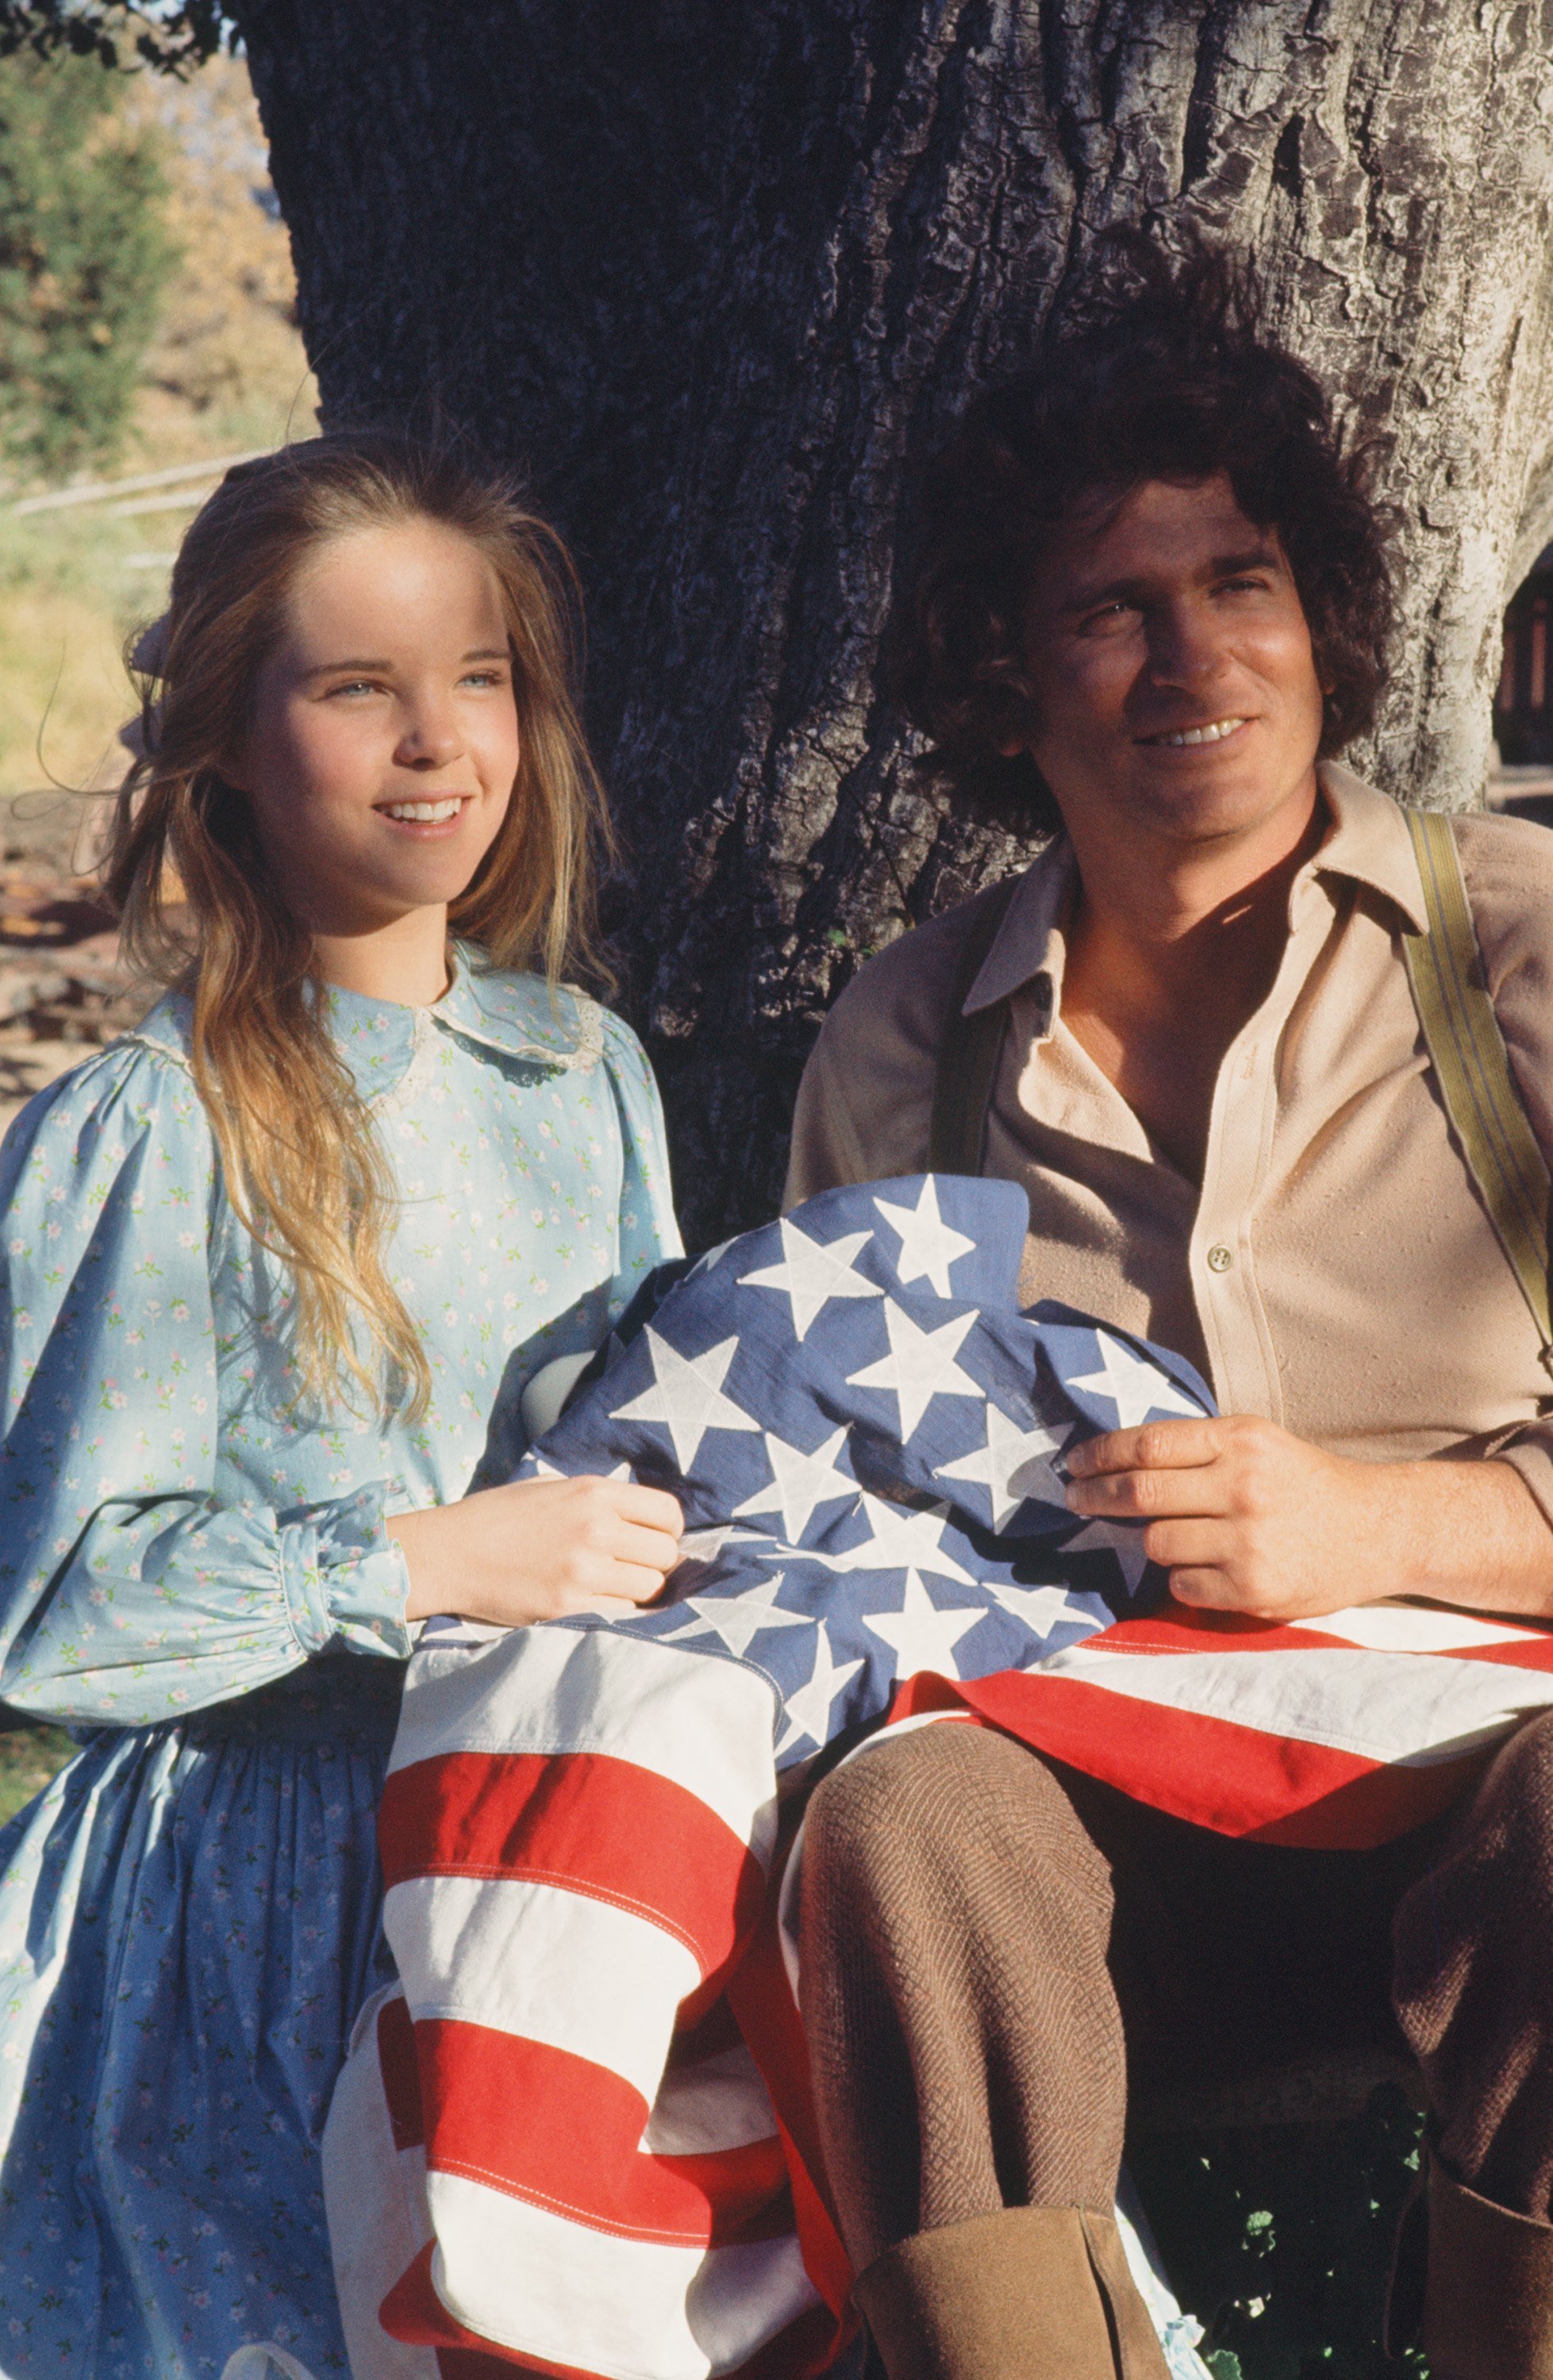 Michael Landon, right, and Melissa Sue Anderson in a scene from 'Little House on the Prairie', 1976